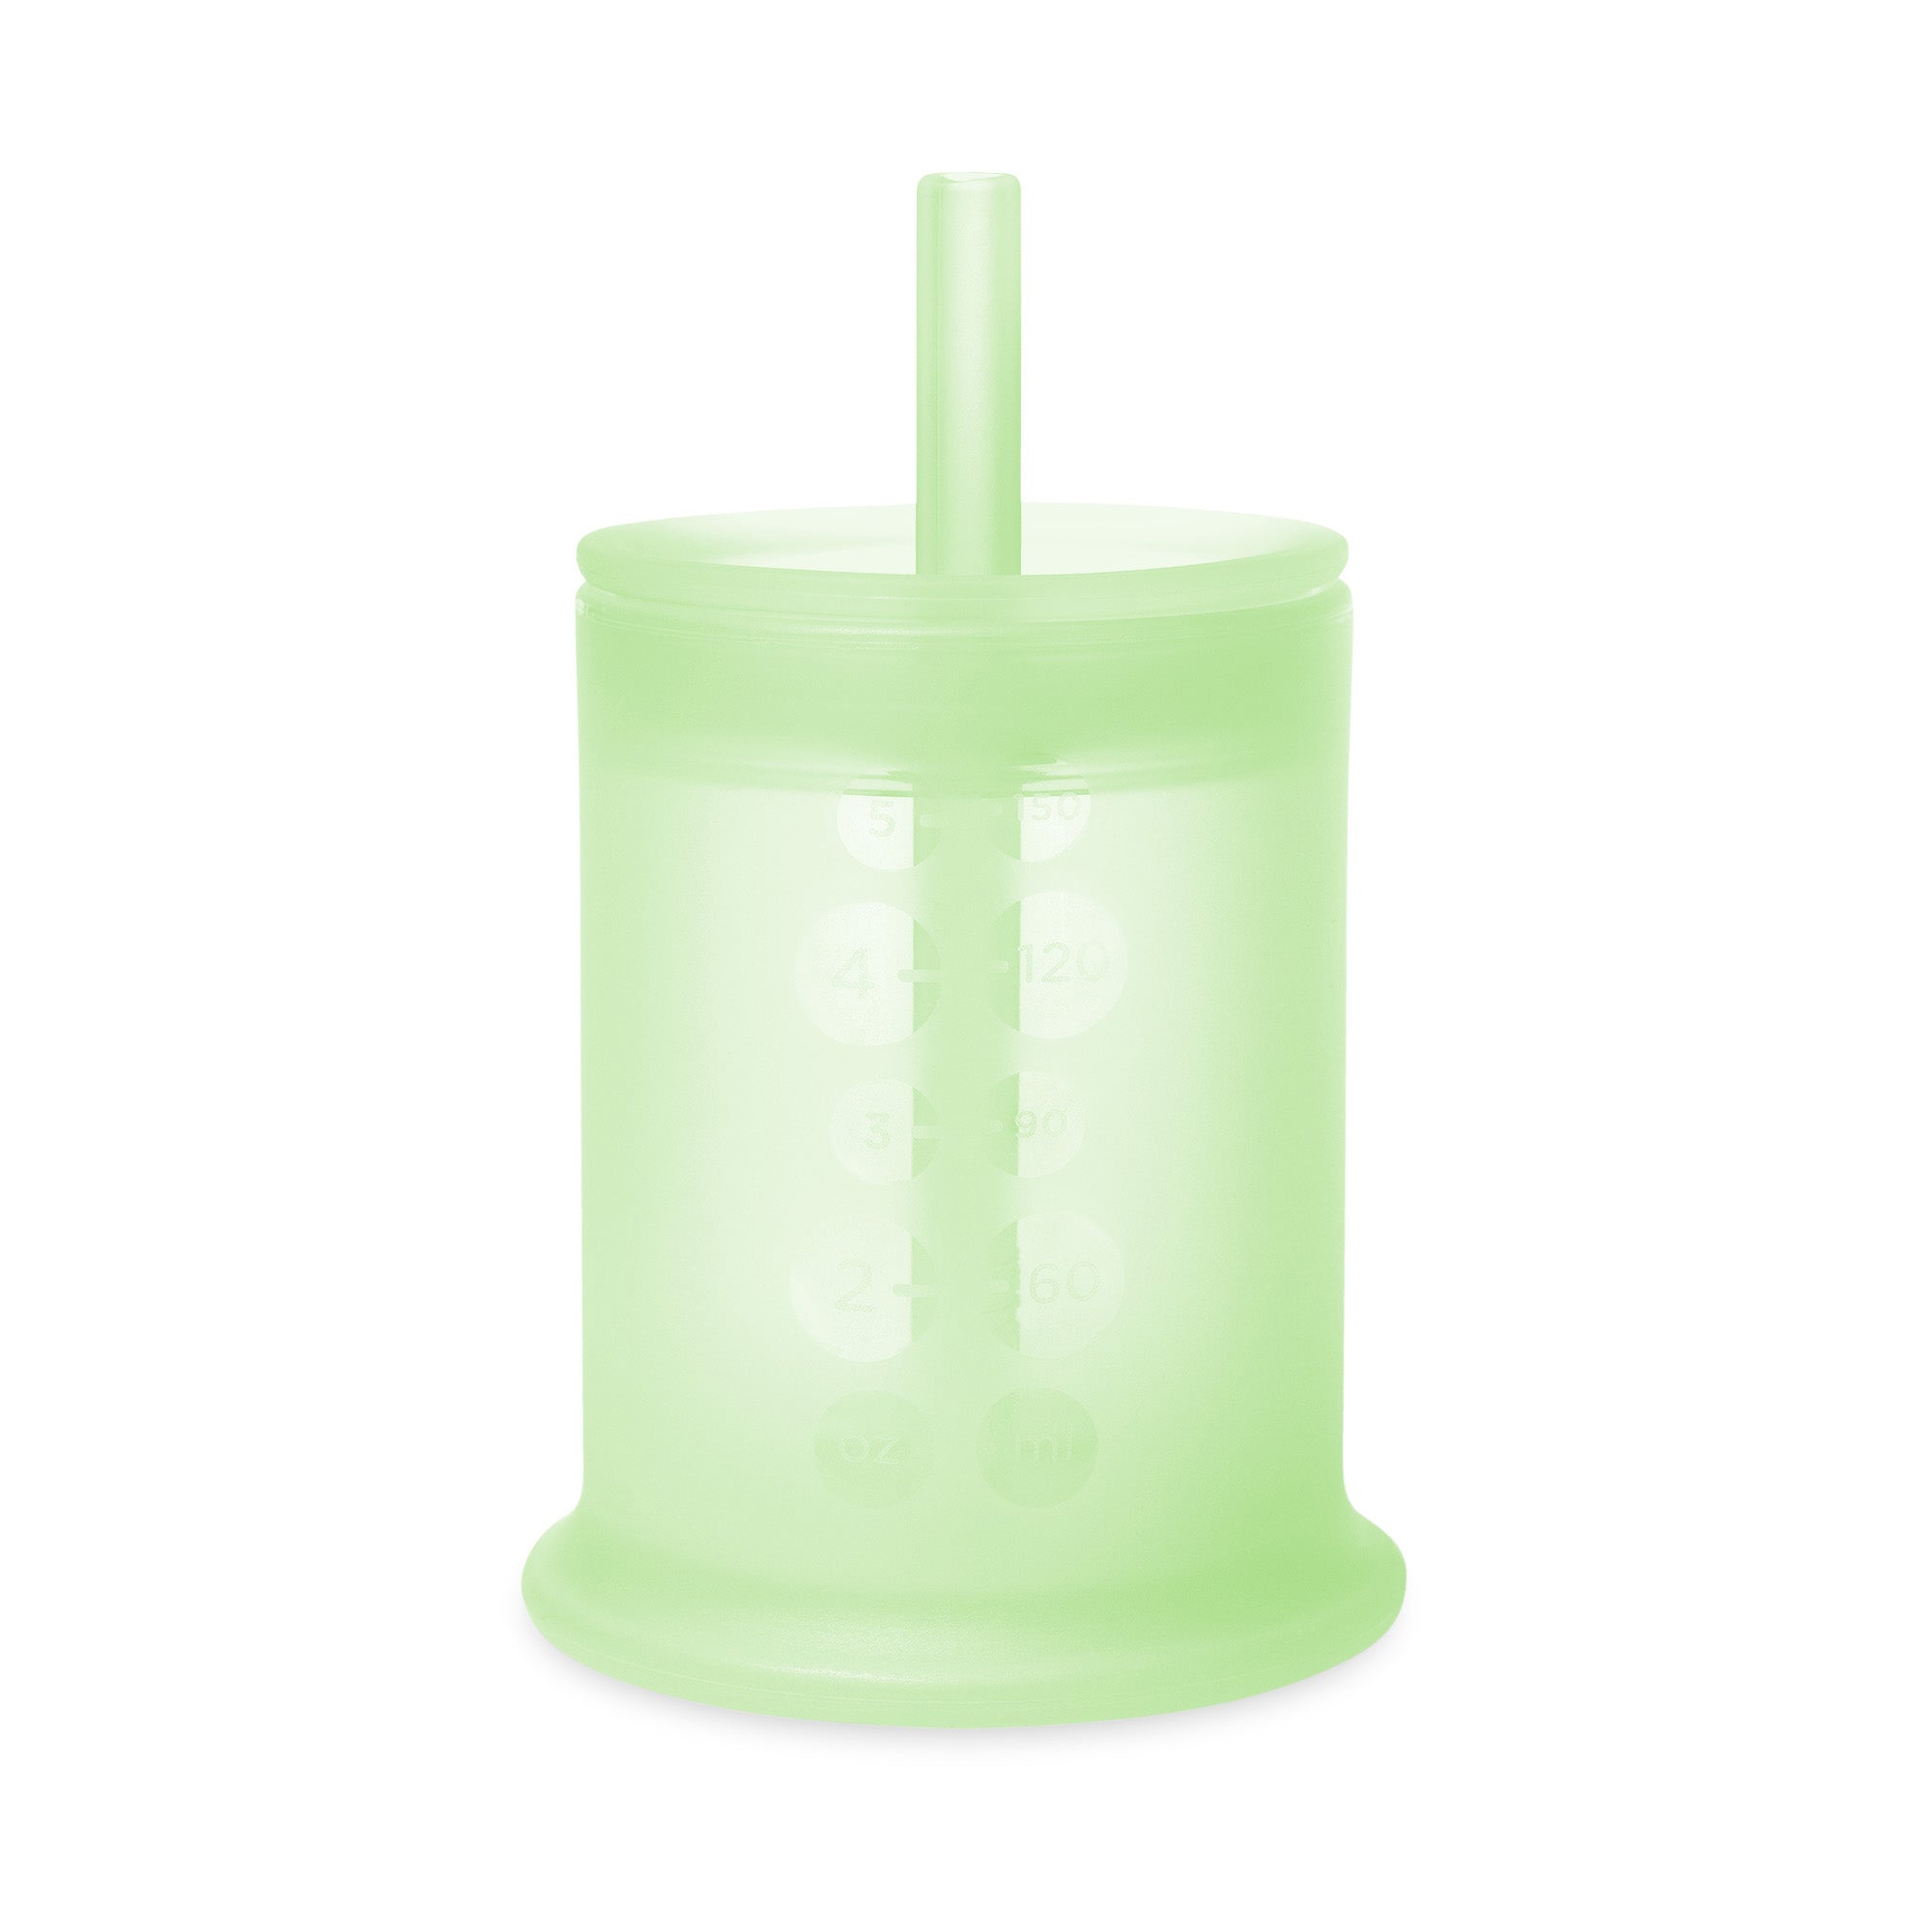 Cute Silicone Straw Cup, Spill-proof Sippy Cups with Double